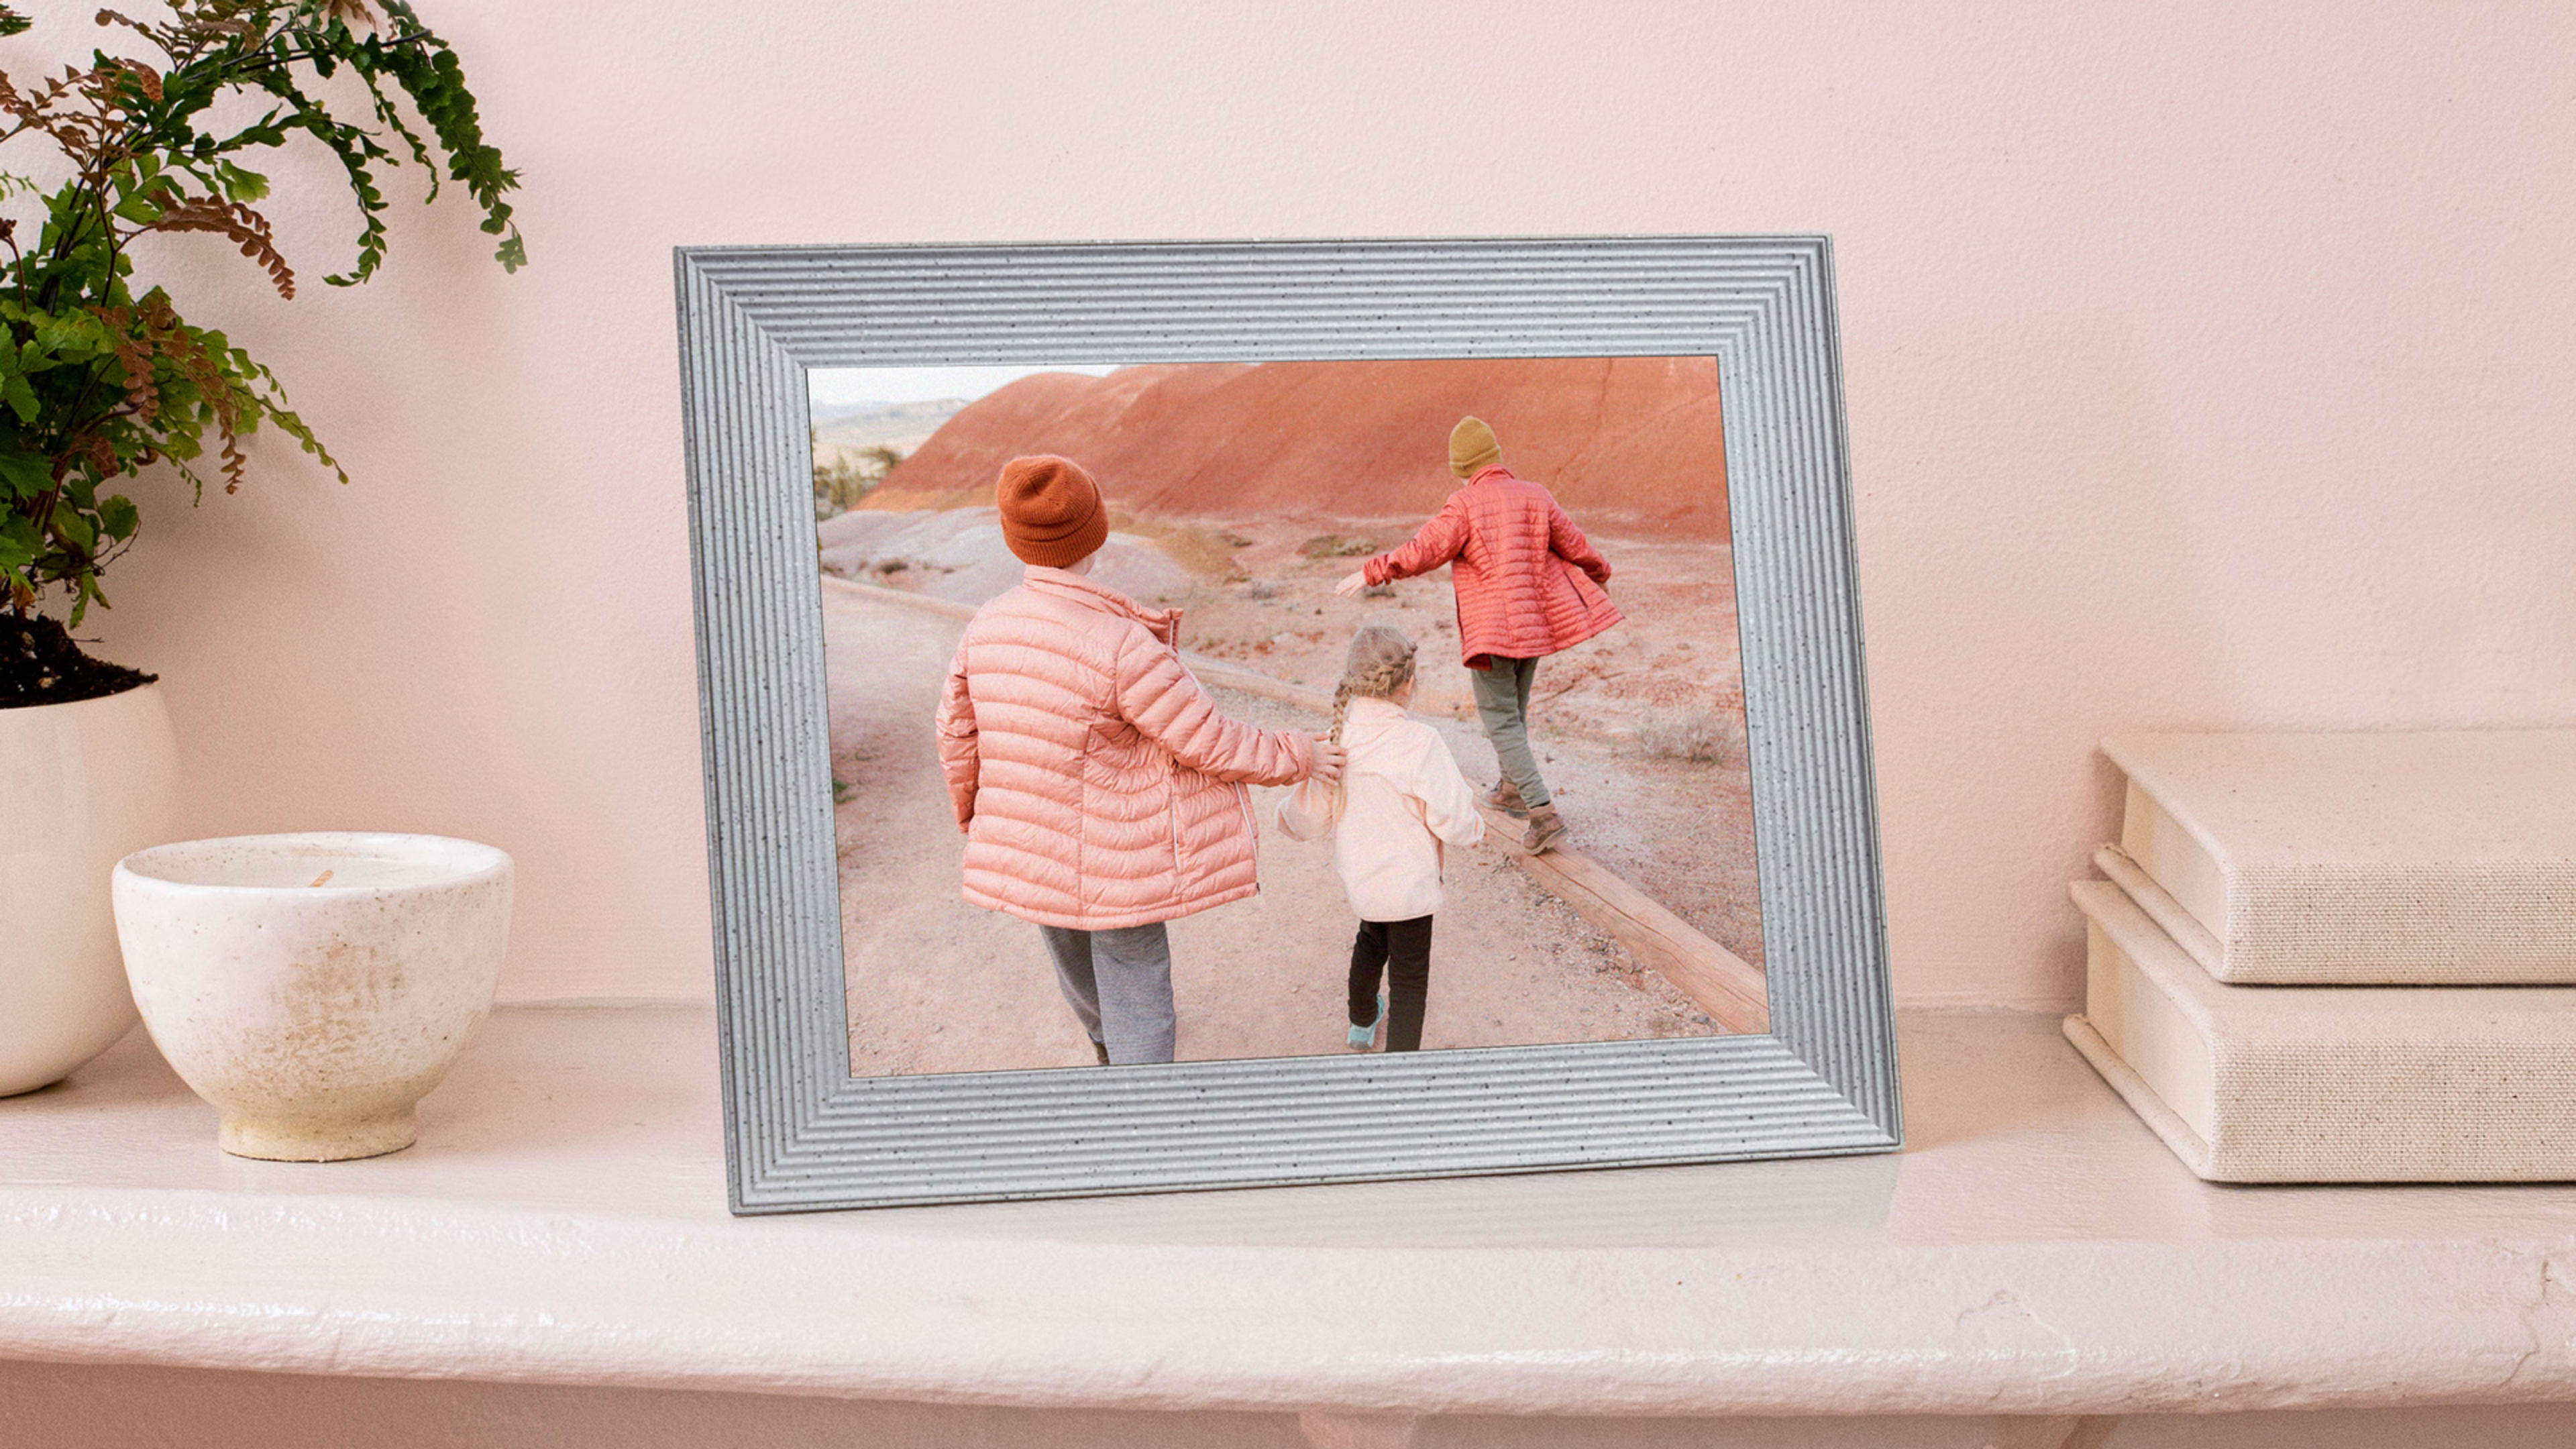 This simple, stylish digital picture frame has replaced social media in my life